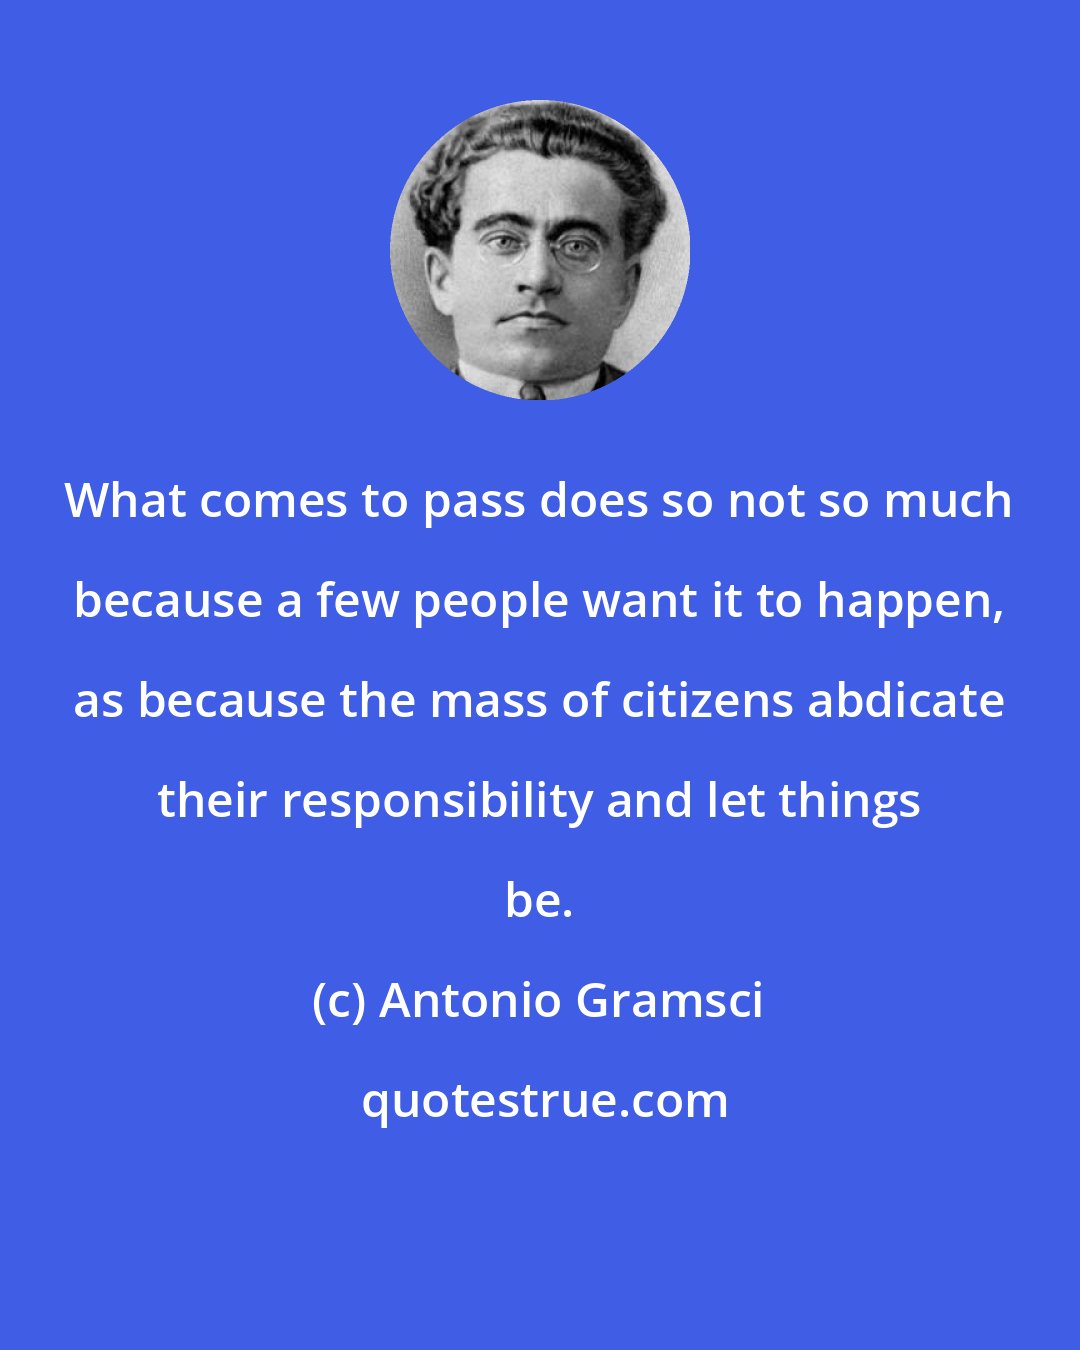 Antonio Gramsci: What comes to pass does so not so much because a few people want it to happen, as because the mass of citizens abdicate their responsibility and let things be.